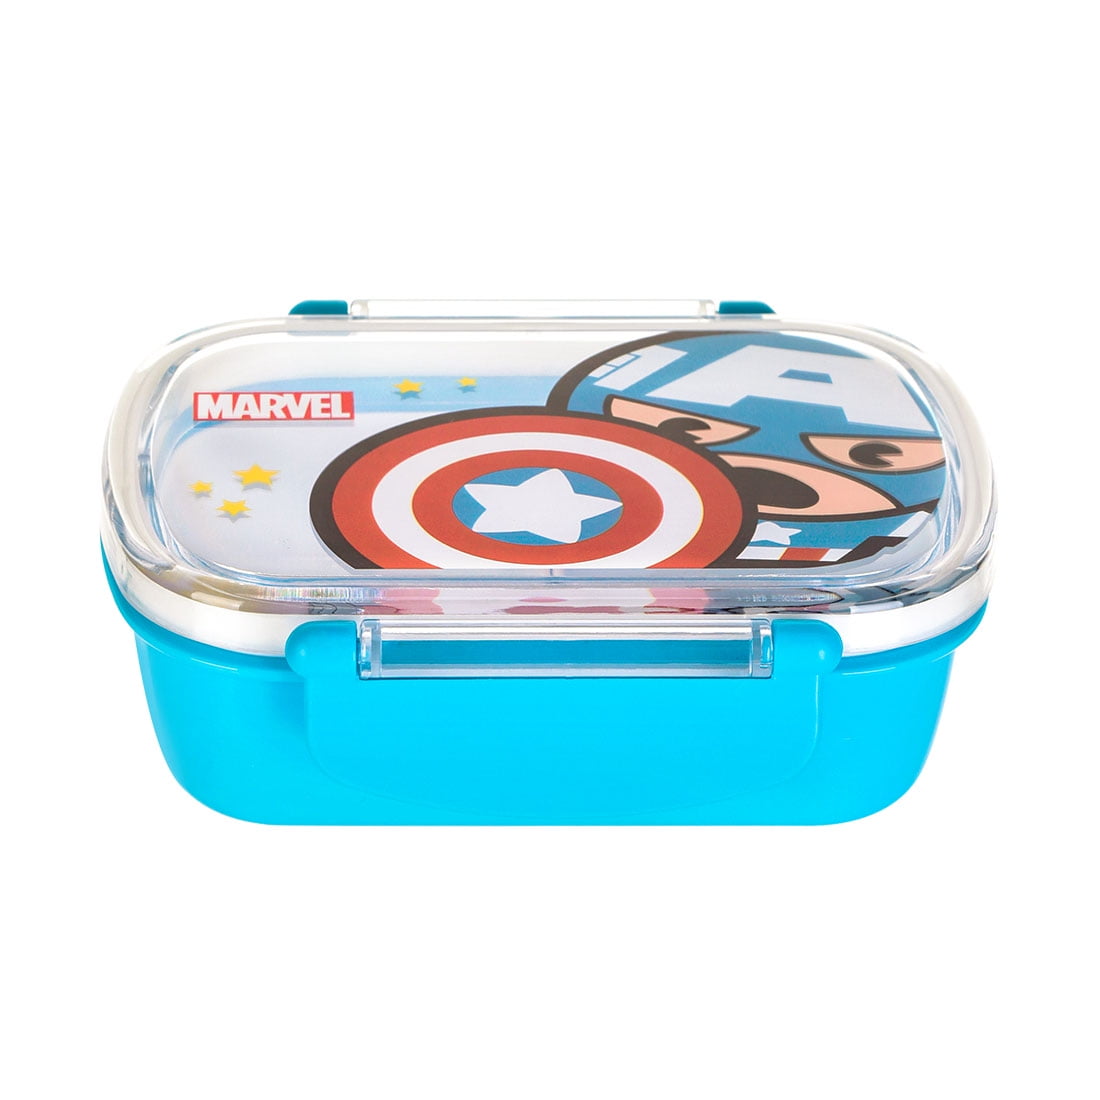 MINISO Indonesia on X: Let's talk about meal ideas to fill in this Spider-Man  lunch box. Do you like Asian food like bento rice or Western cuisine like  burgers? #miniso #minisolife  /